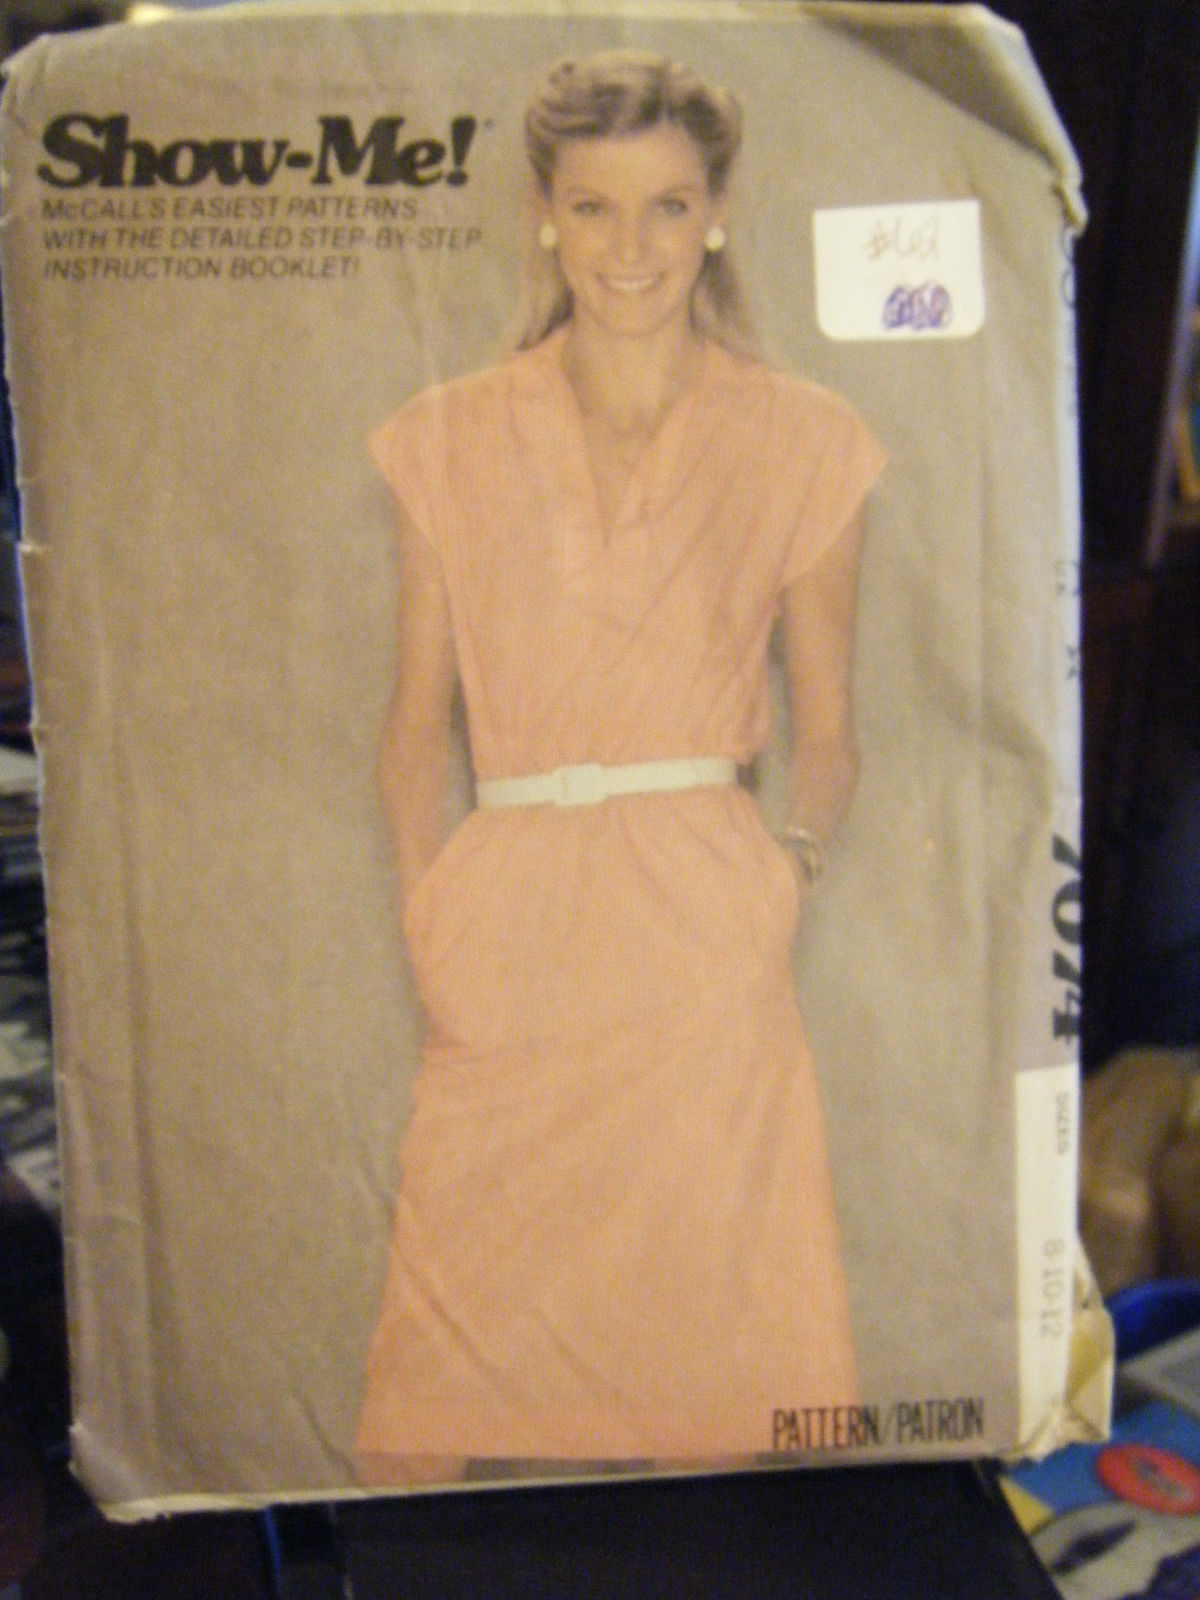 Primary image for McCall's Show-Me 7074 Misses Dress & Tie Belt Pattern - Sizes 8 & 10